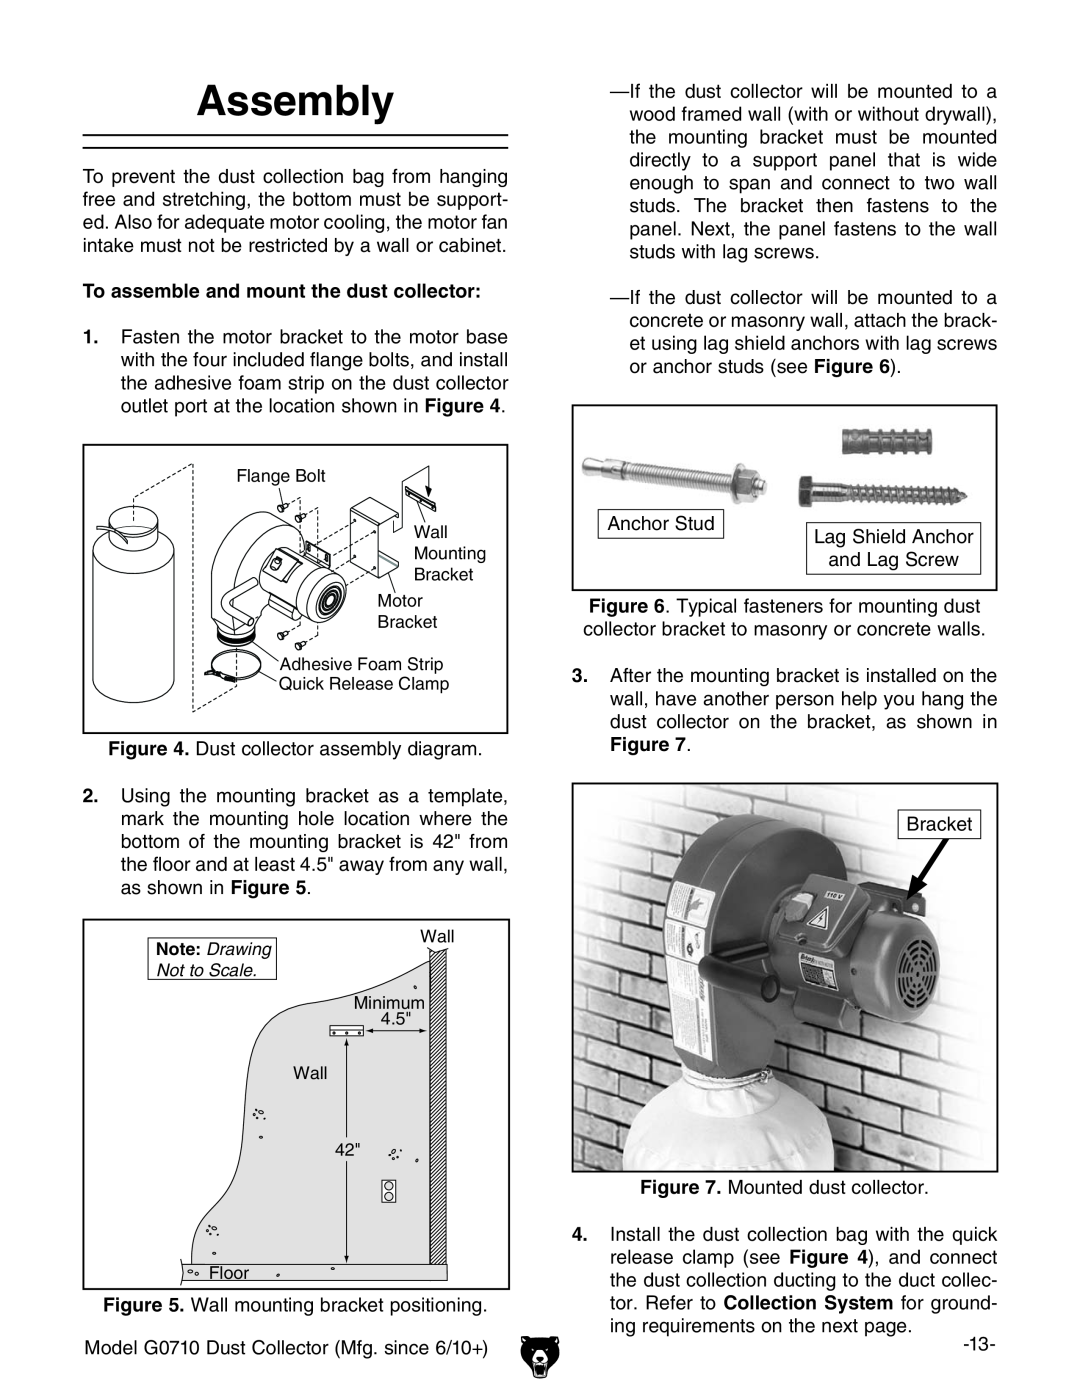 Grizzly G0710 owner manual Assembly, To assemble and mount the dust collector 